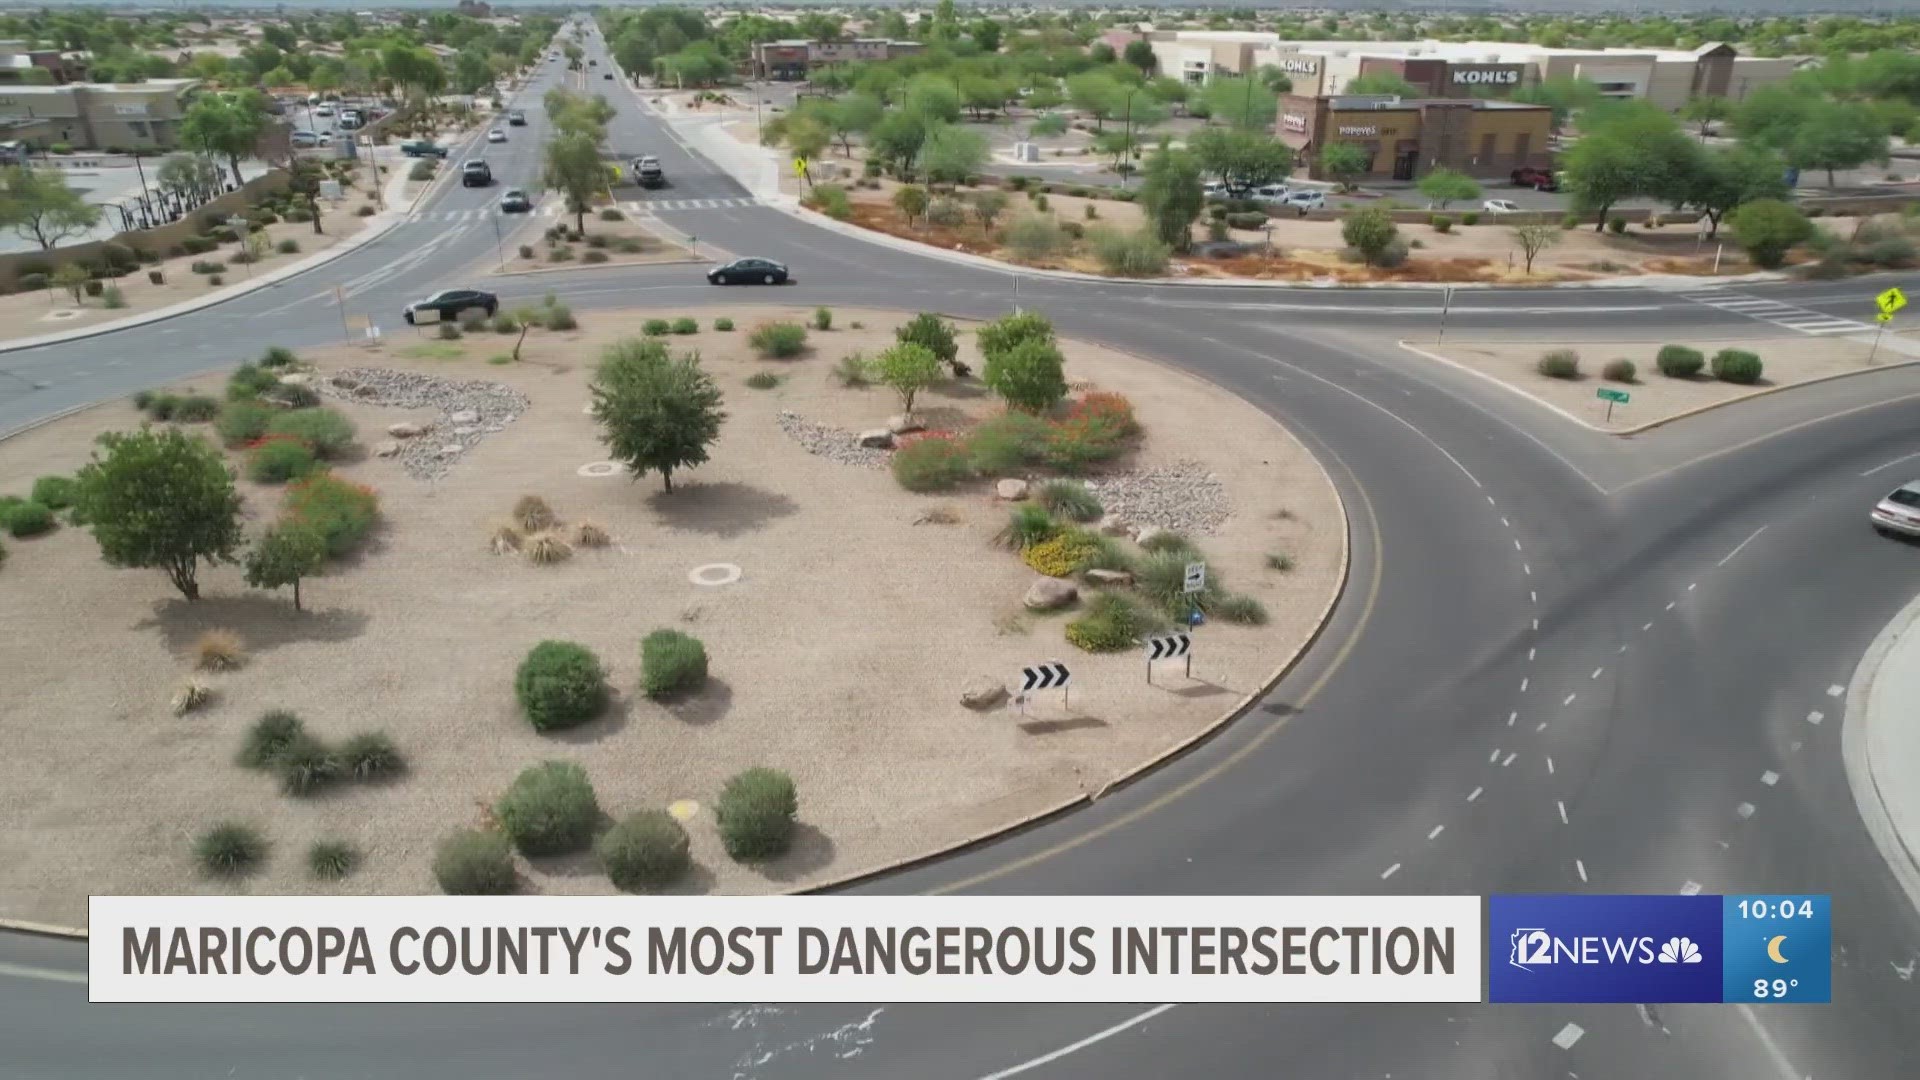 The Maricopa Association of Governments ranked 99th Avenue and Lower Buckeye Road the worst intersection after hundreds of crashes occurred there.